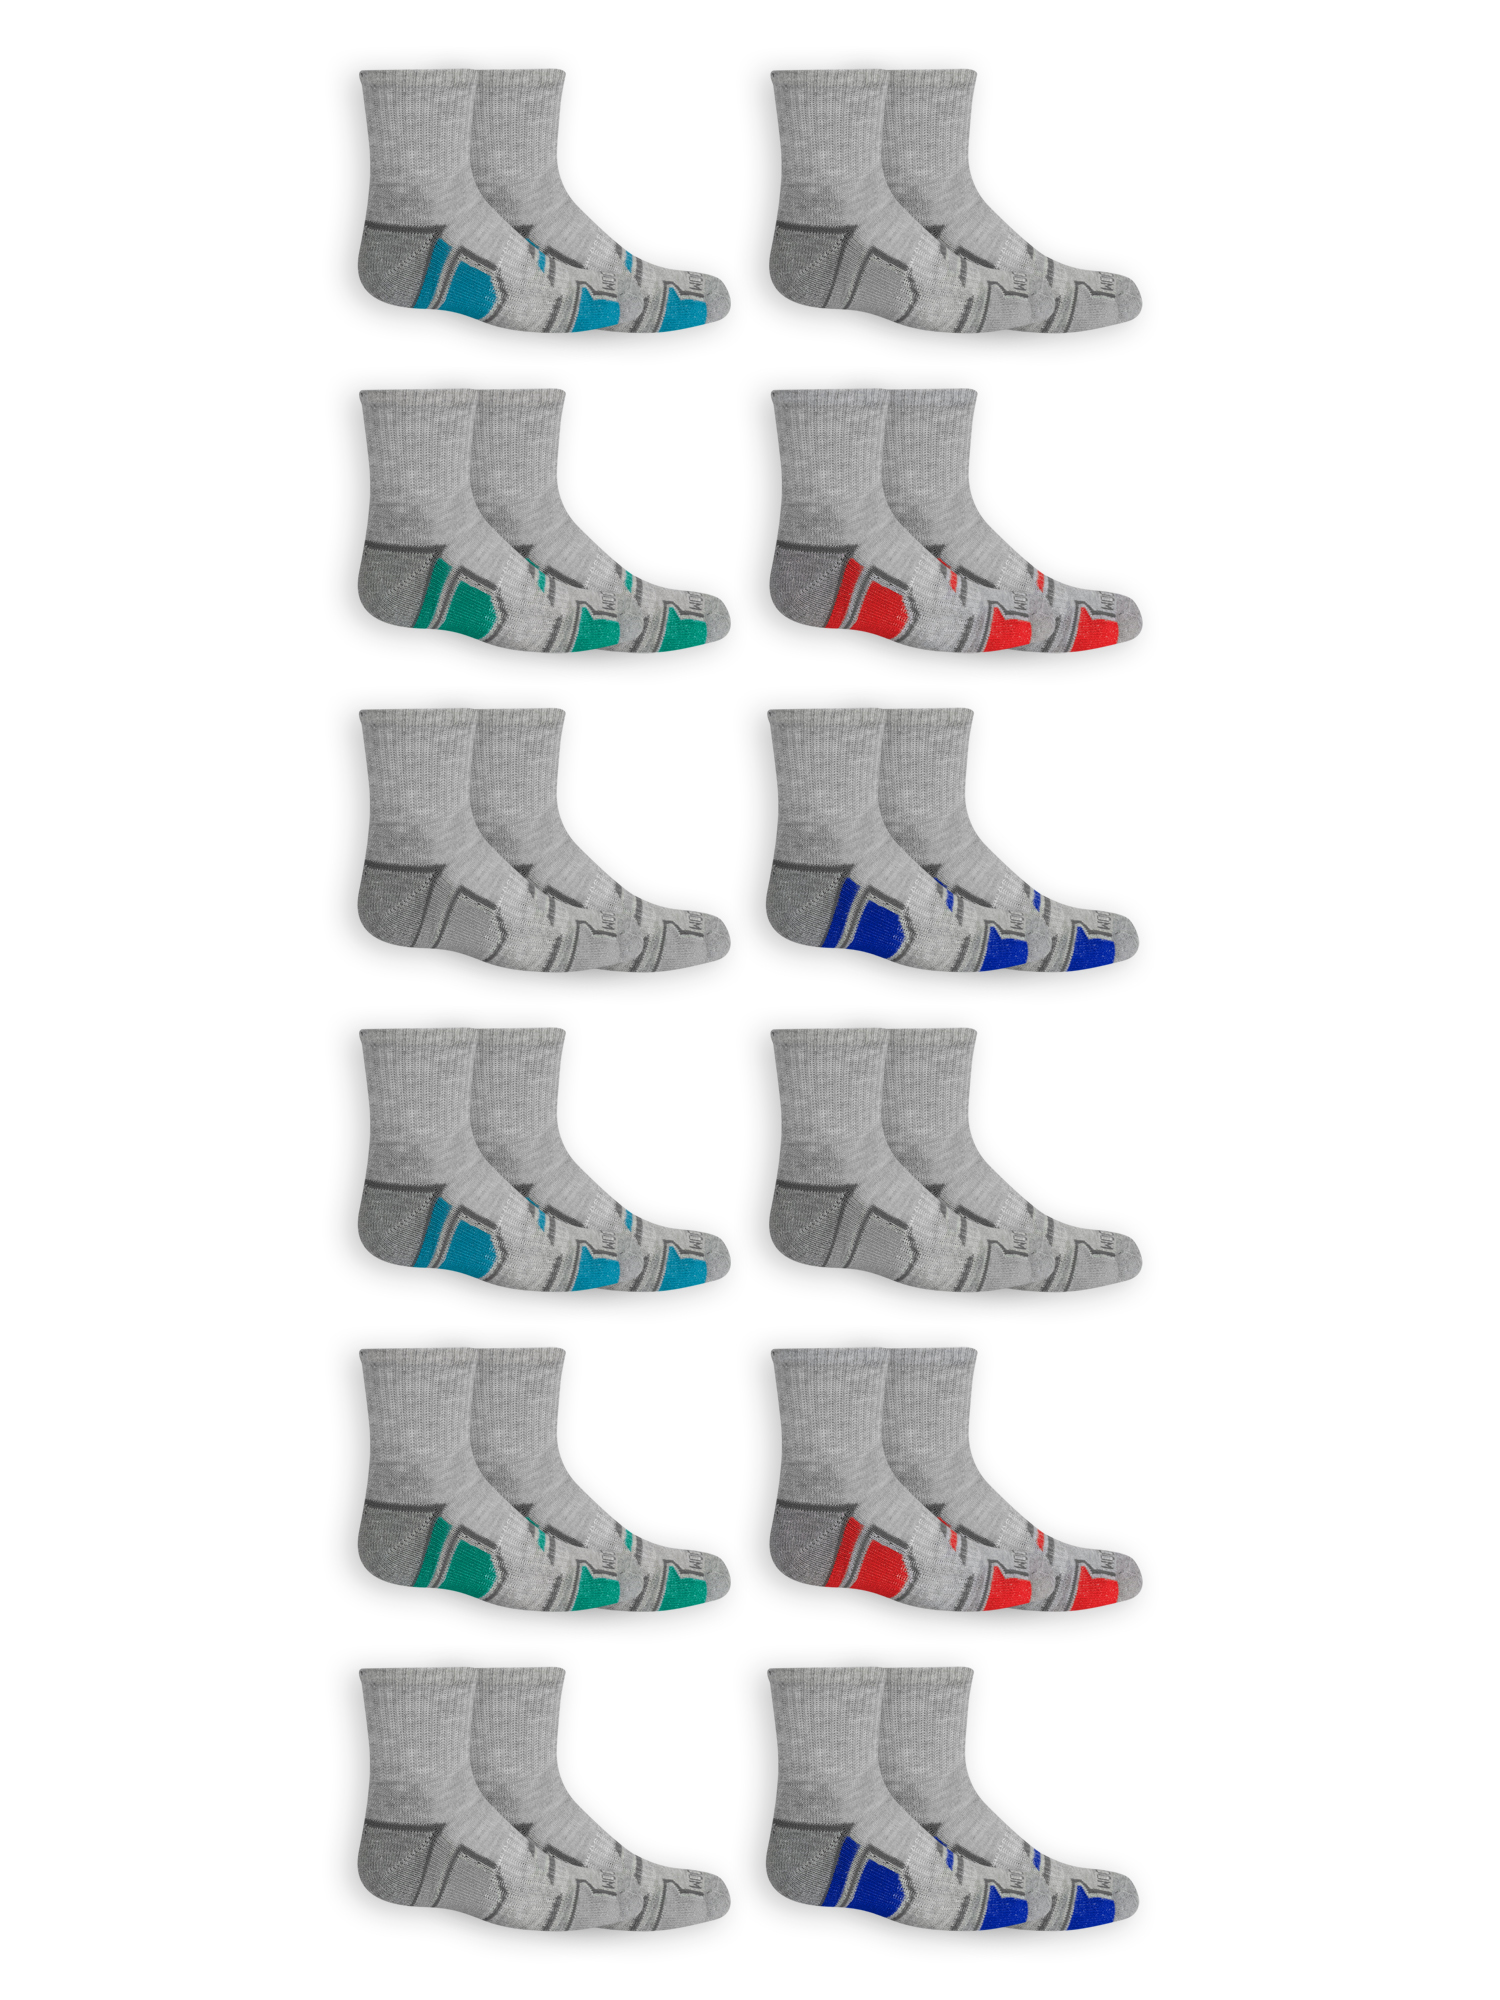 Fruit of the Loom Boys Active Ankle Socks, 12 Pack - image 3 of 5